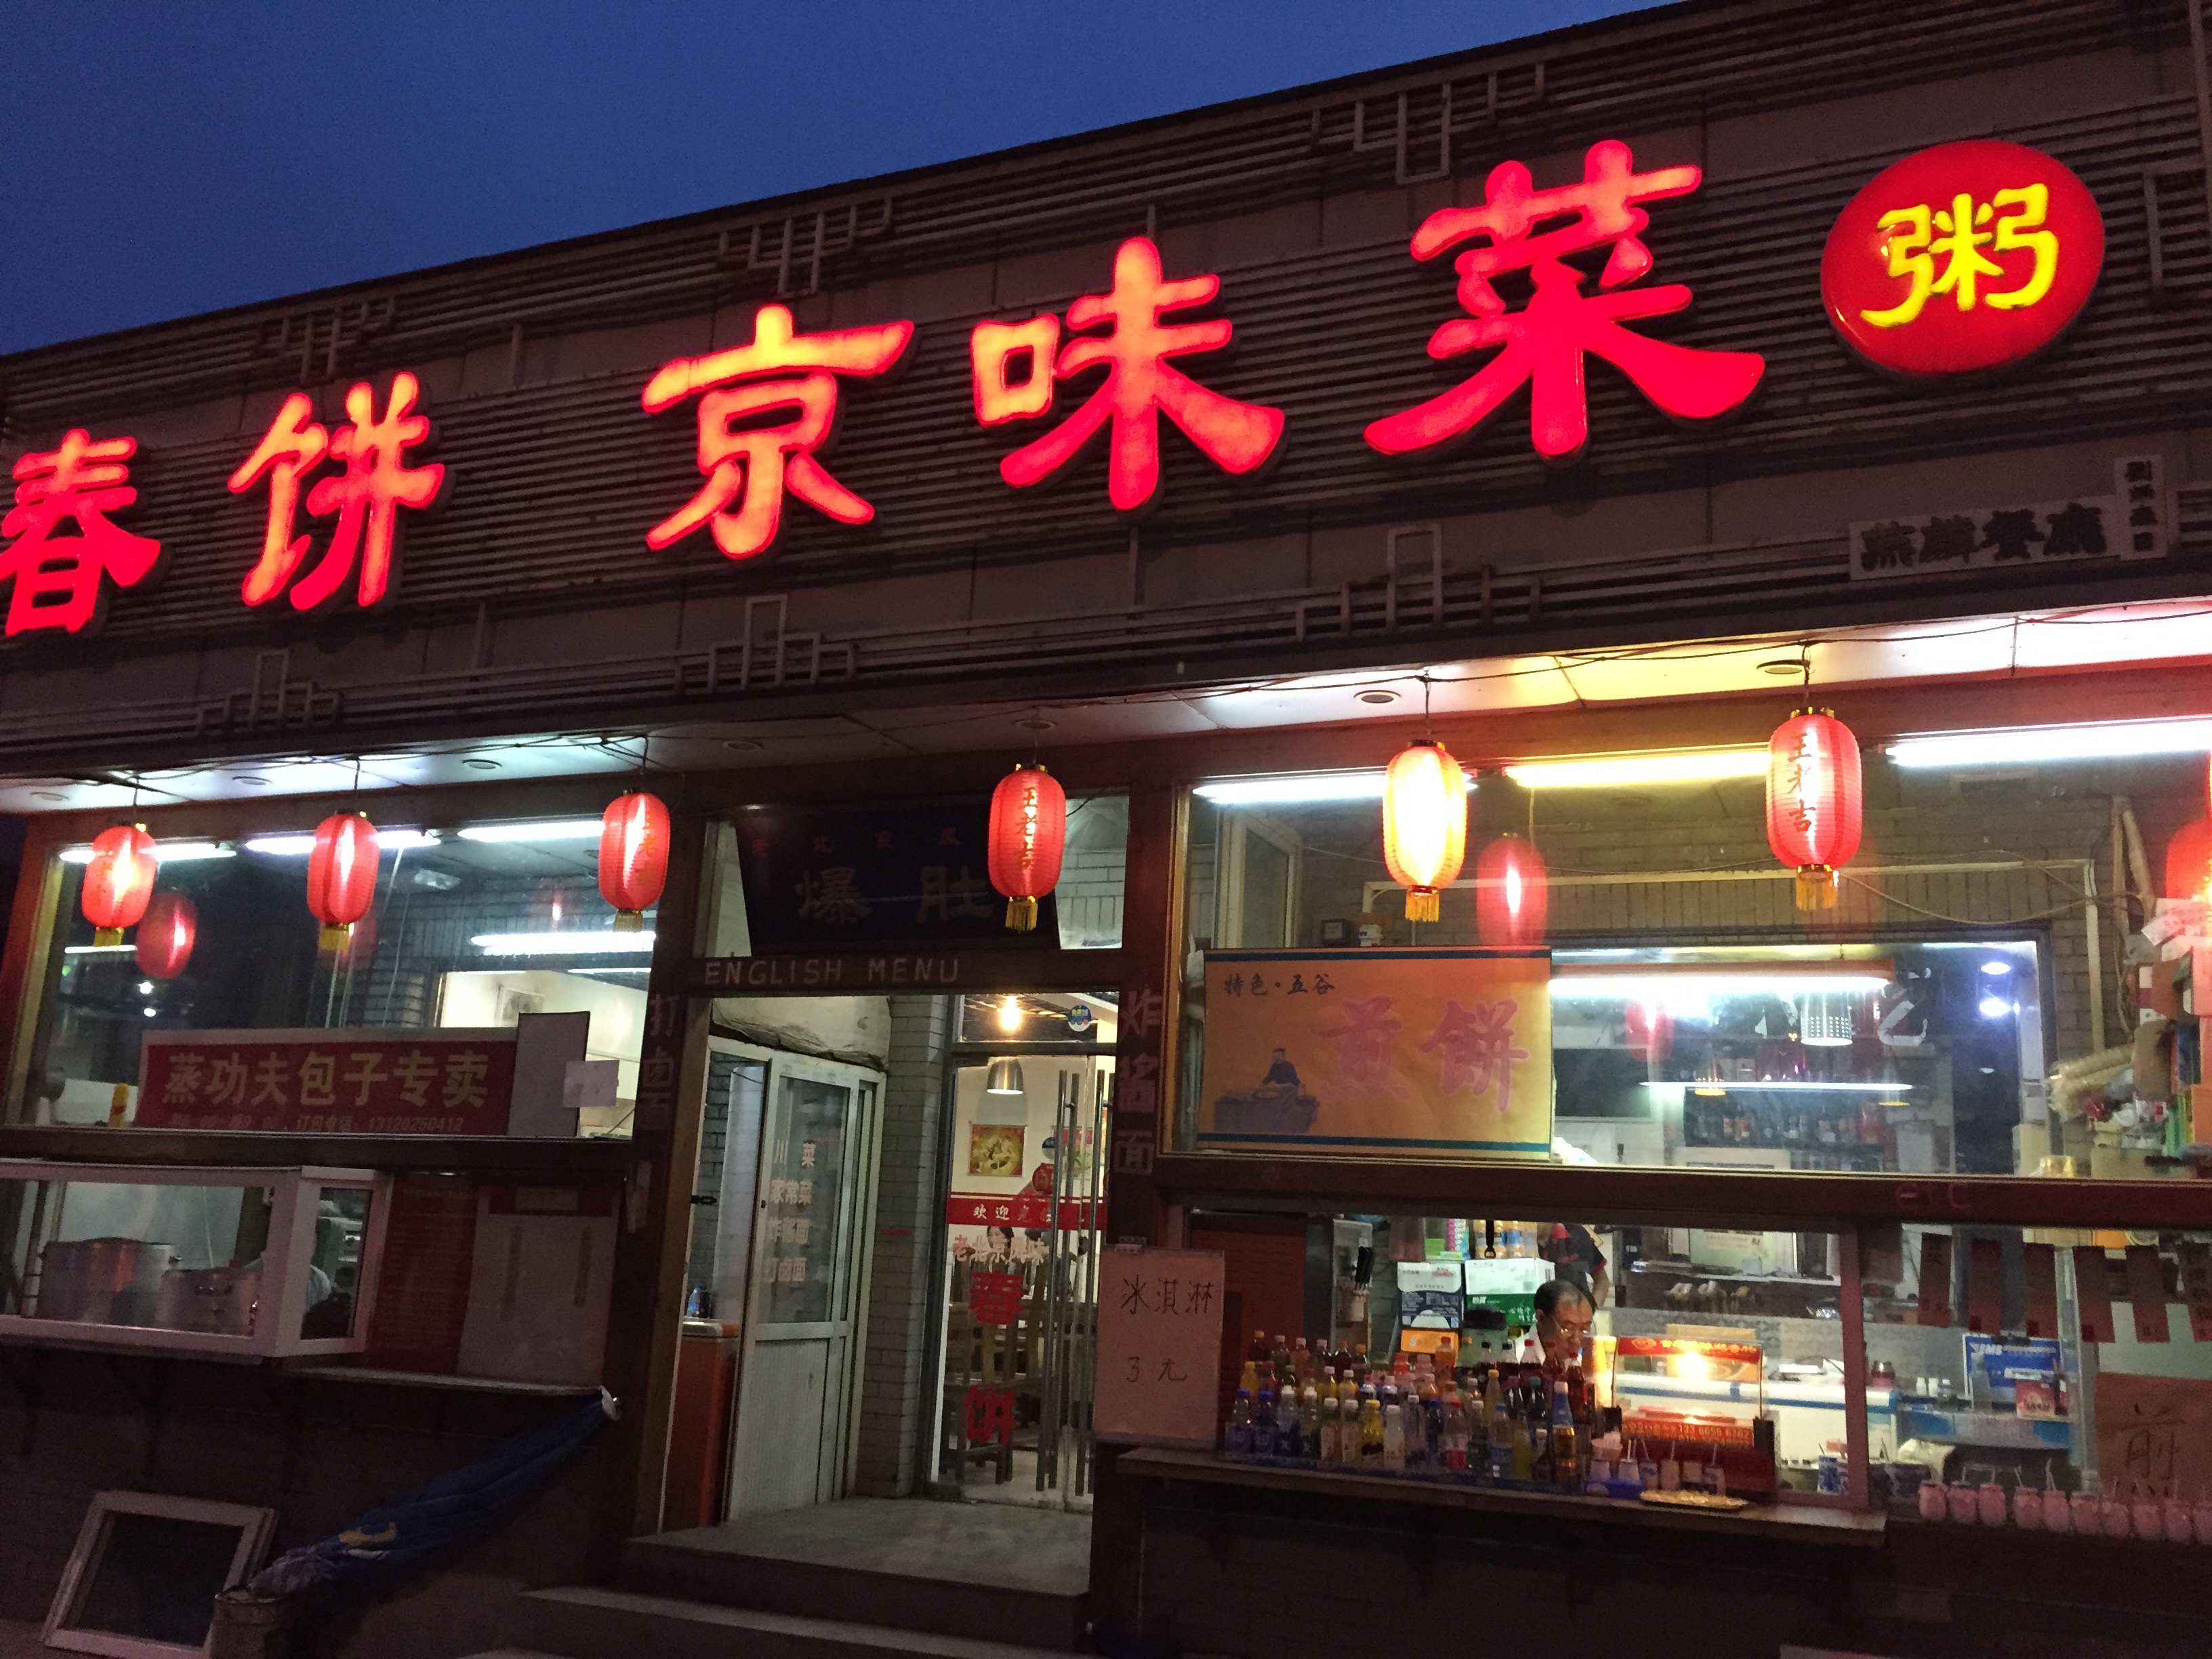 Chunbing and Xiangchun: Wrap up the Essential Tastes of Beijing